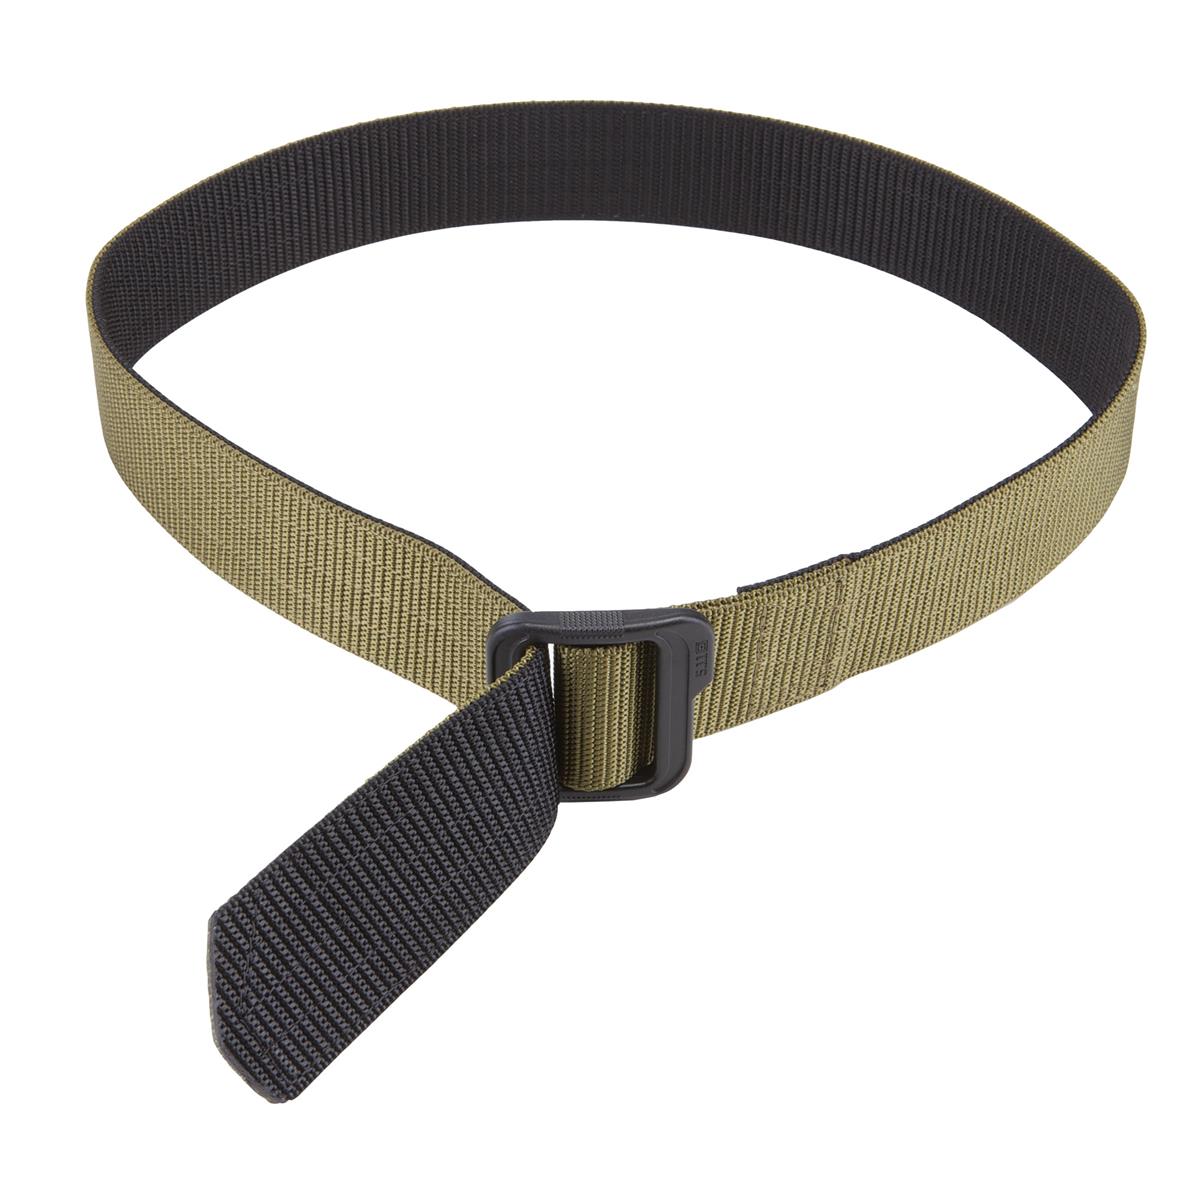 UPC 844802226912 product image for 5.11 Tactical 59567 TDU Green 2XL Double Duty TDU Belt - 1.75